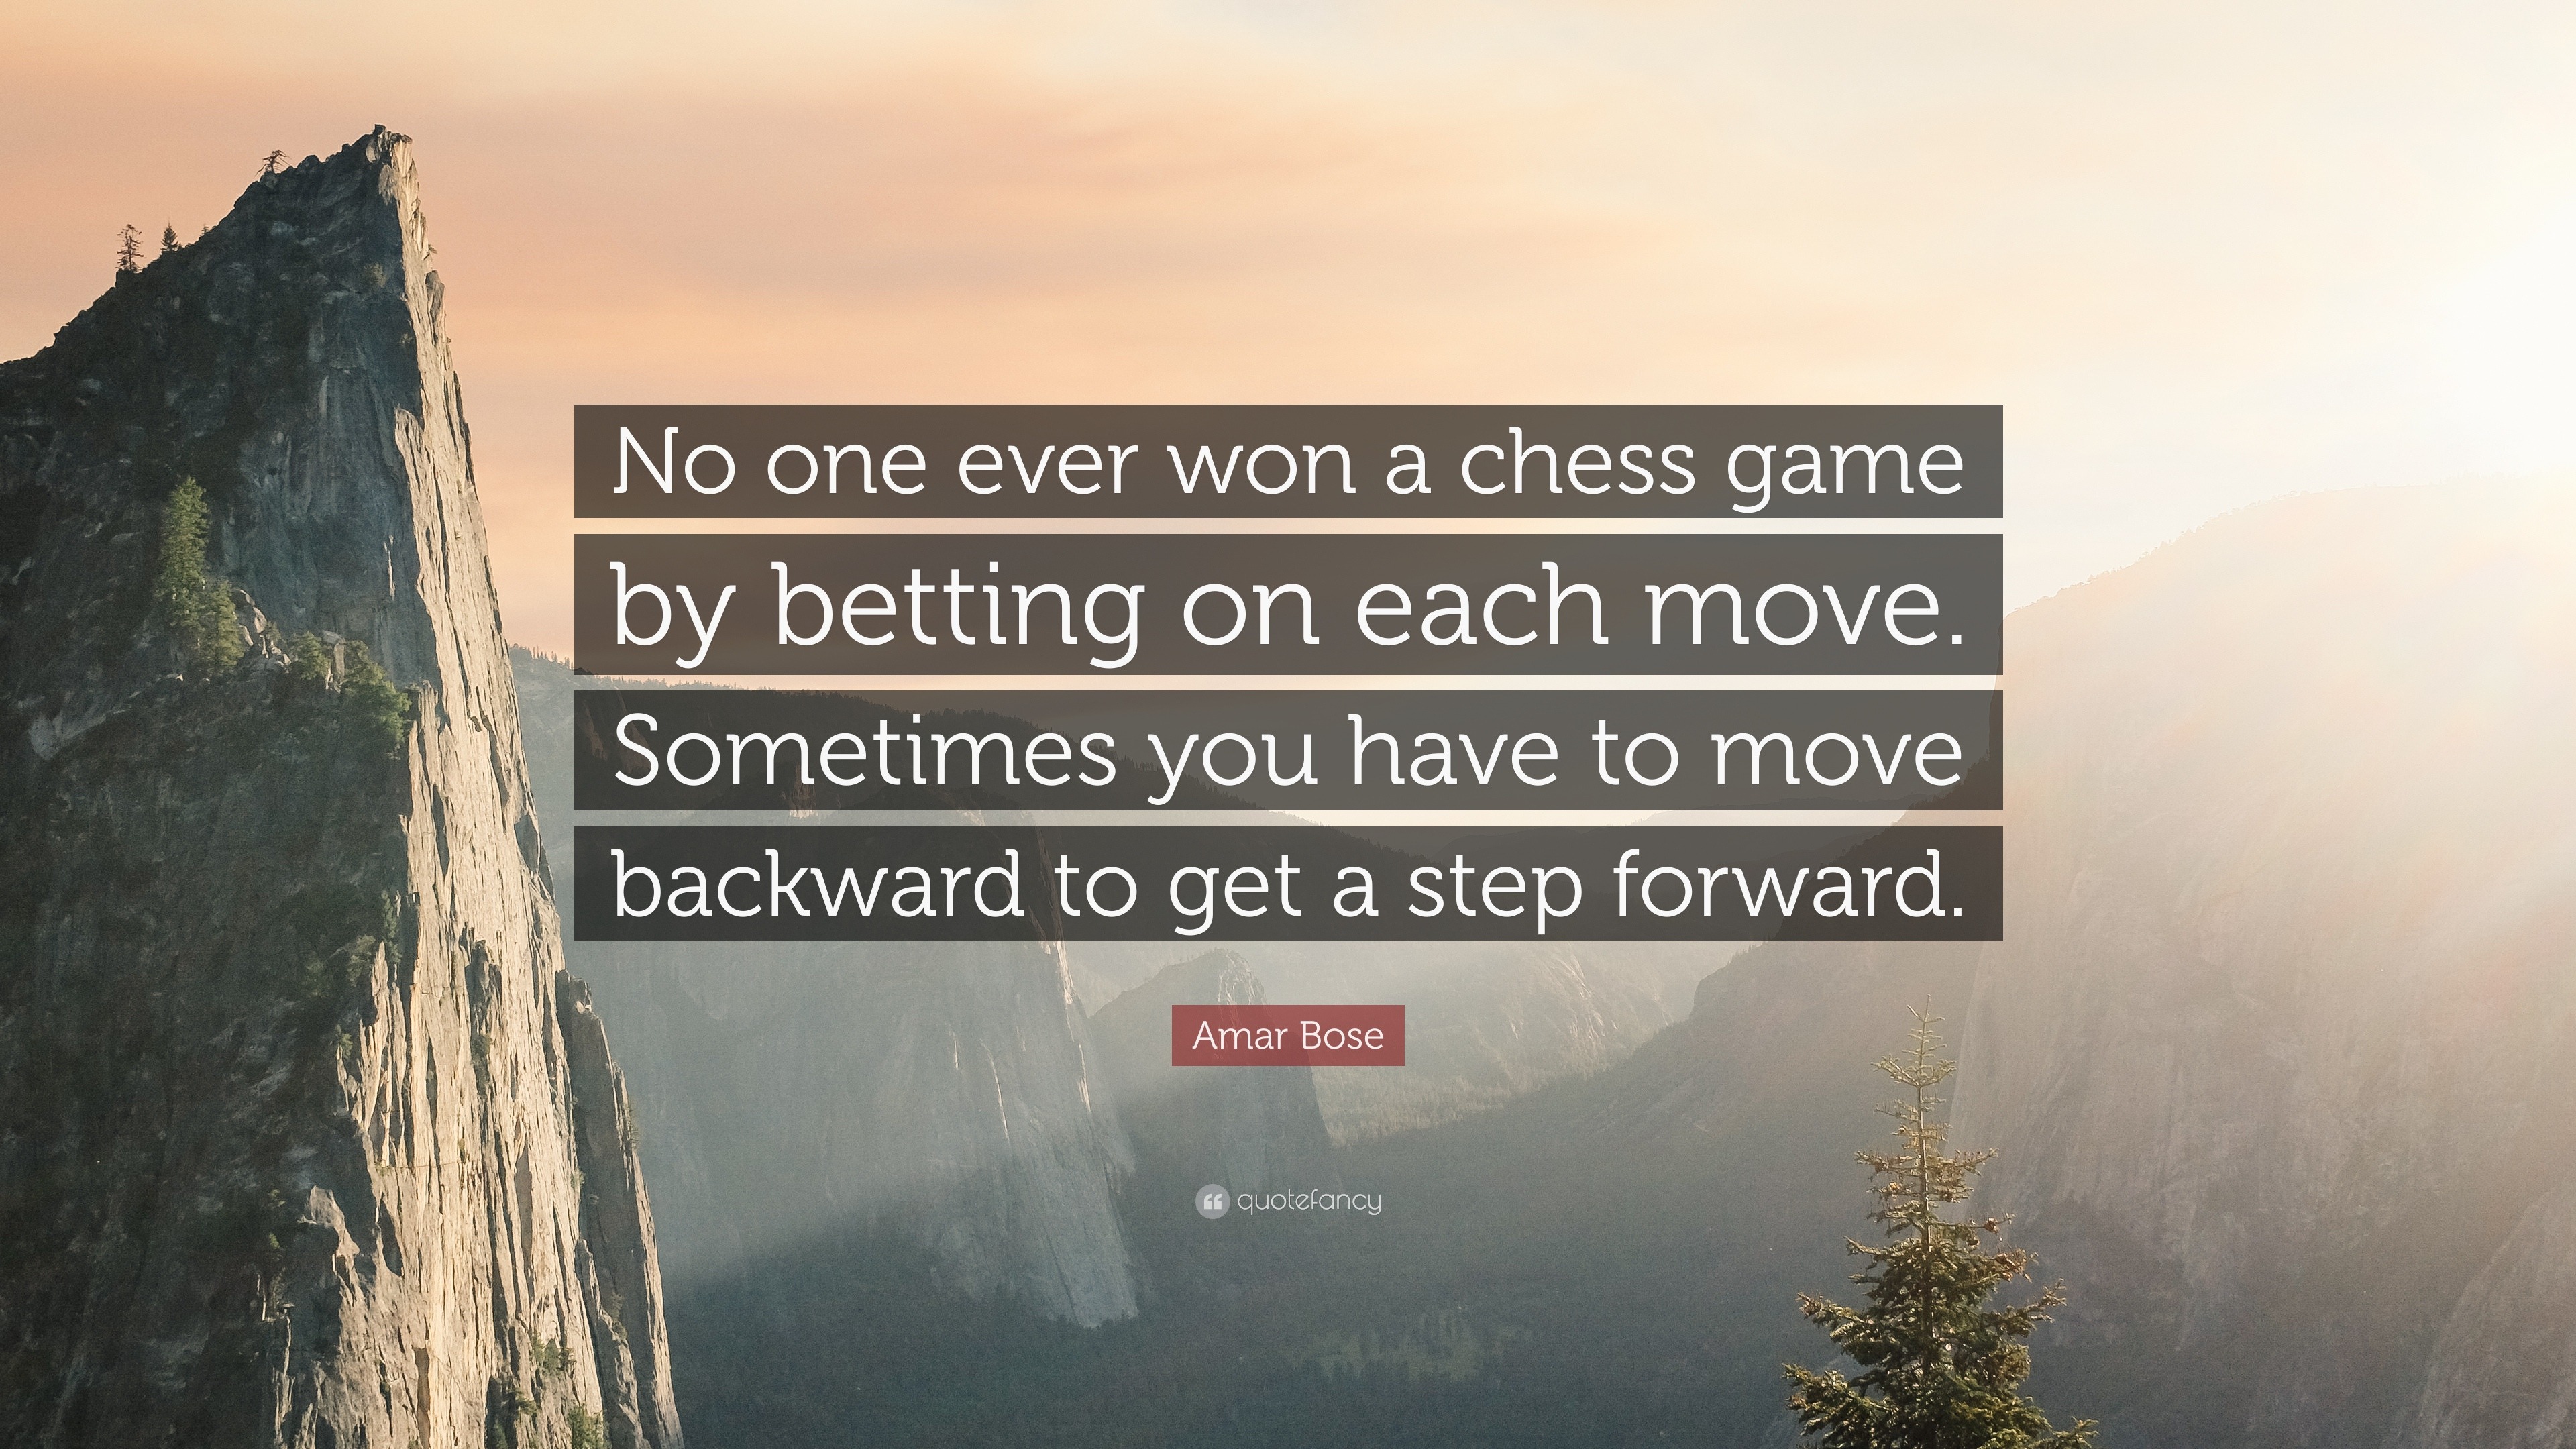 Inspiring Quotes - Be Positive on X: No one has ever won a game of chess  by only taking forward moves. Sometimes you have to move backwards to take  better steps forward.